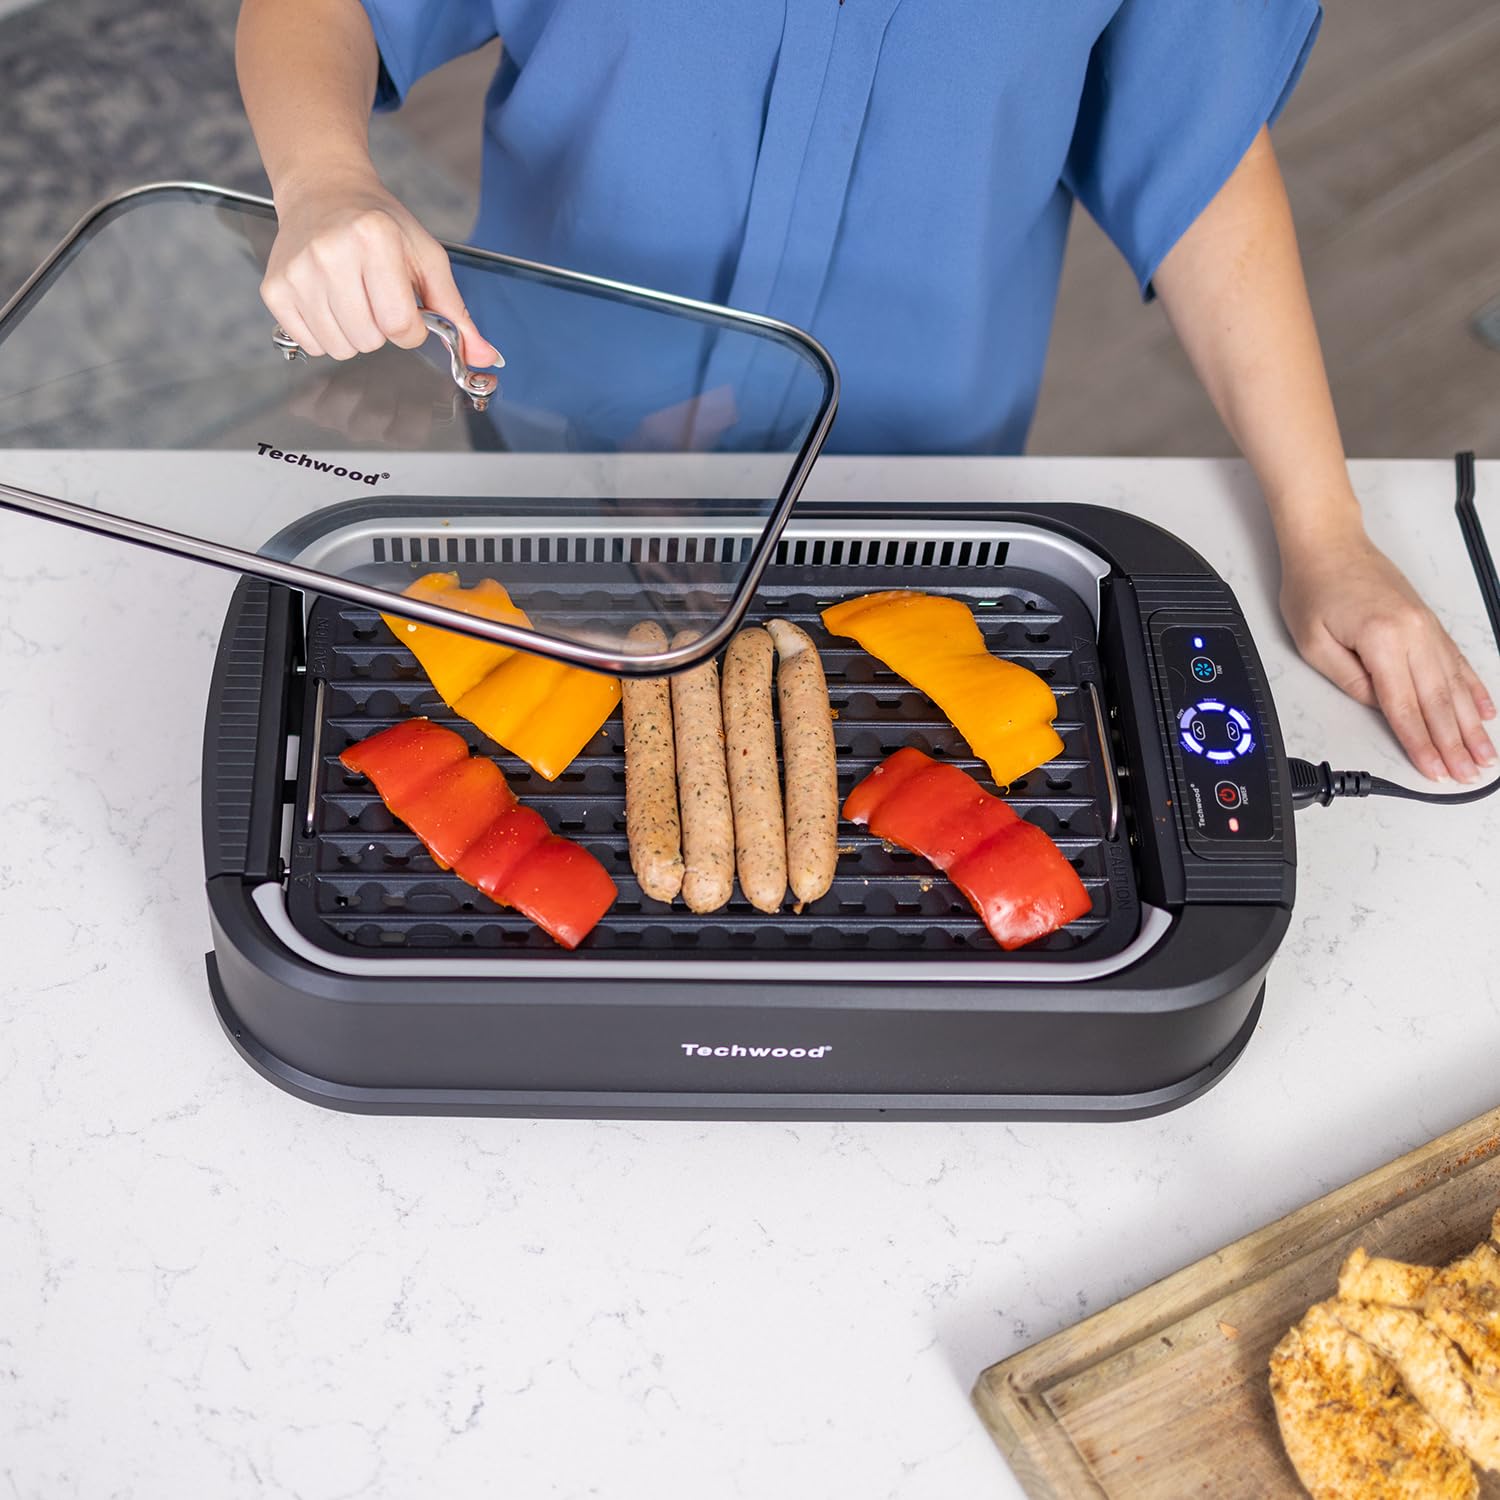 Power XL Smokeless Electric Indoor Removable Grill and Griddle